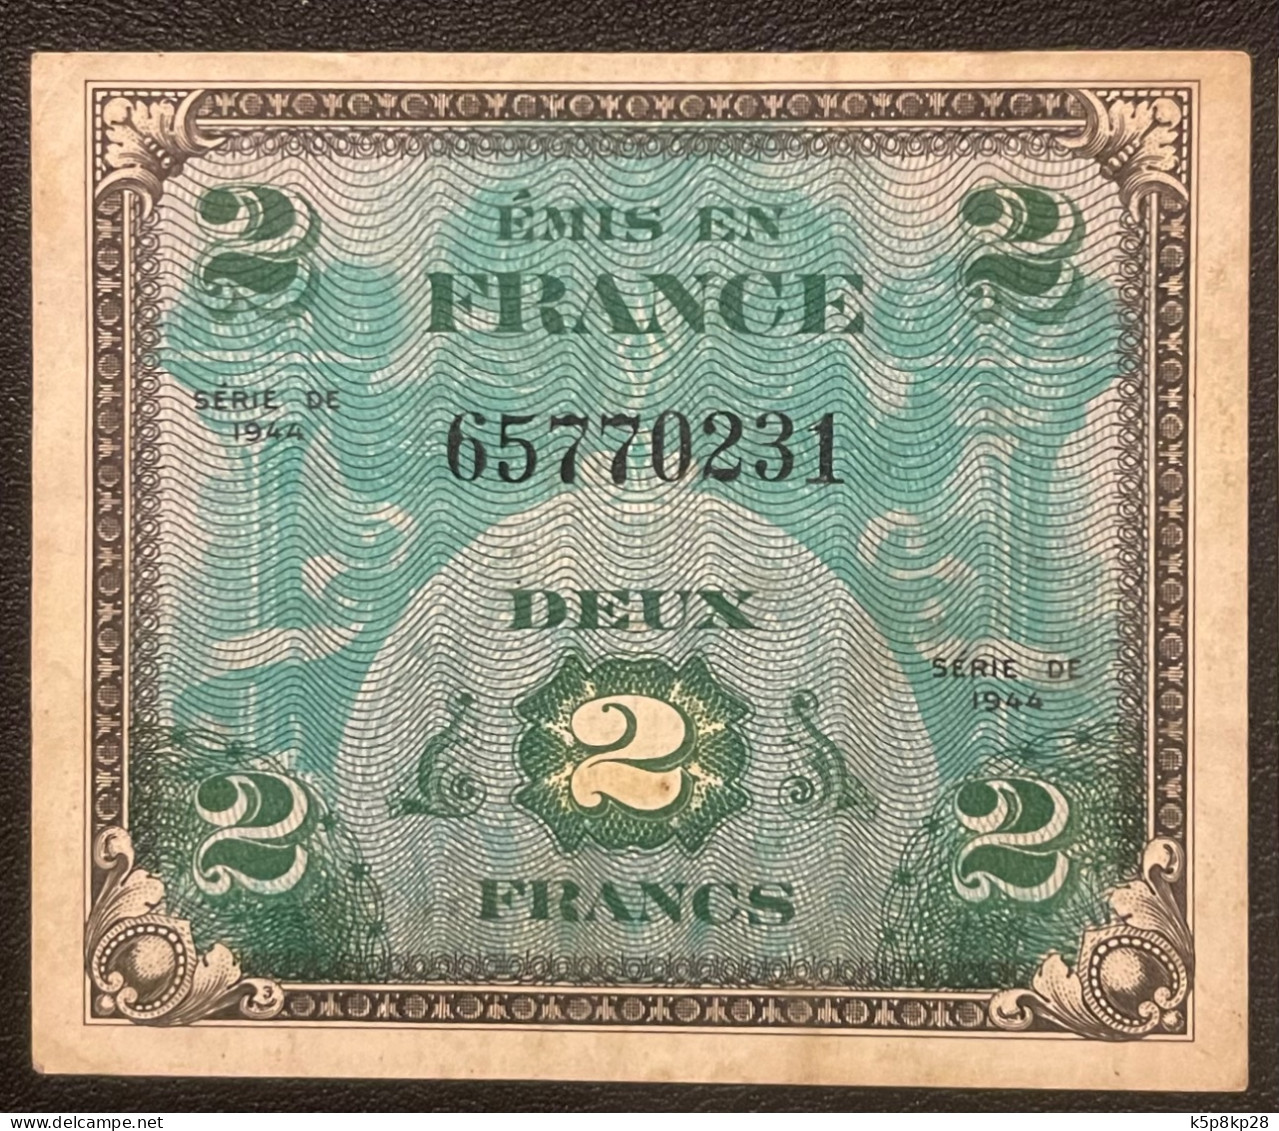 1944 France Banknotes, VF - Unclassified